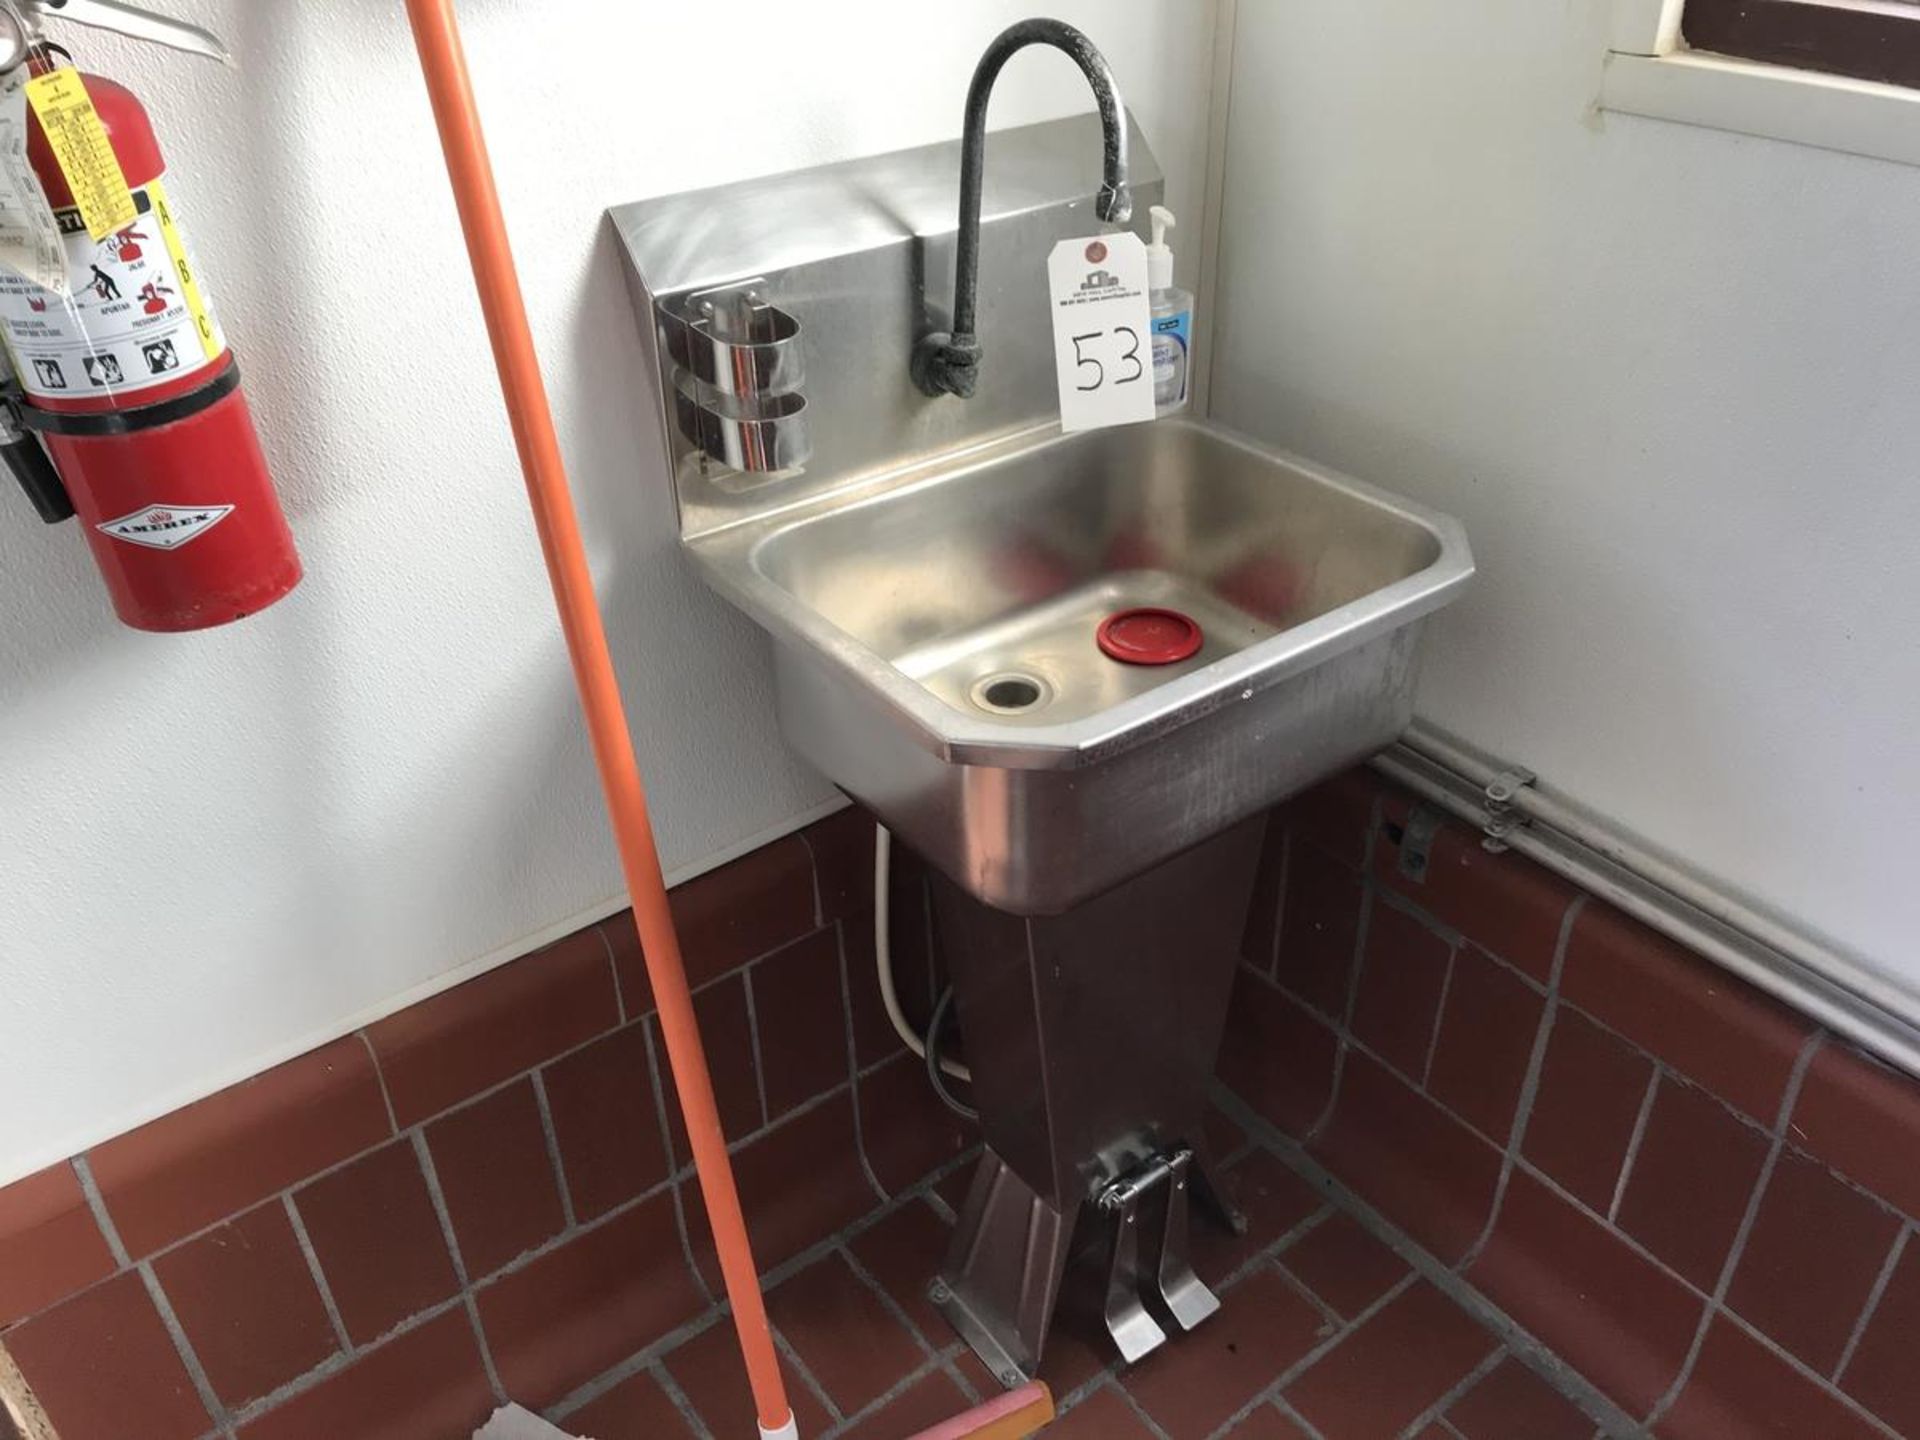 Stainless Steel Sink with Foot Controls, Water Heater, Paper Towel Dispenser | Rig Fee: $150